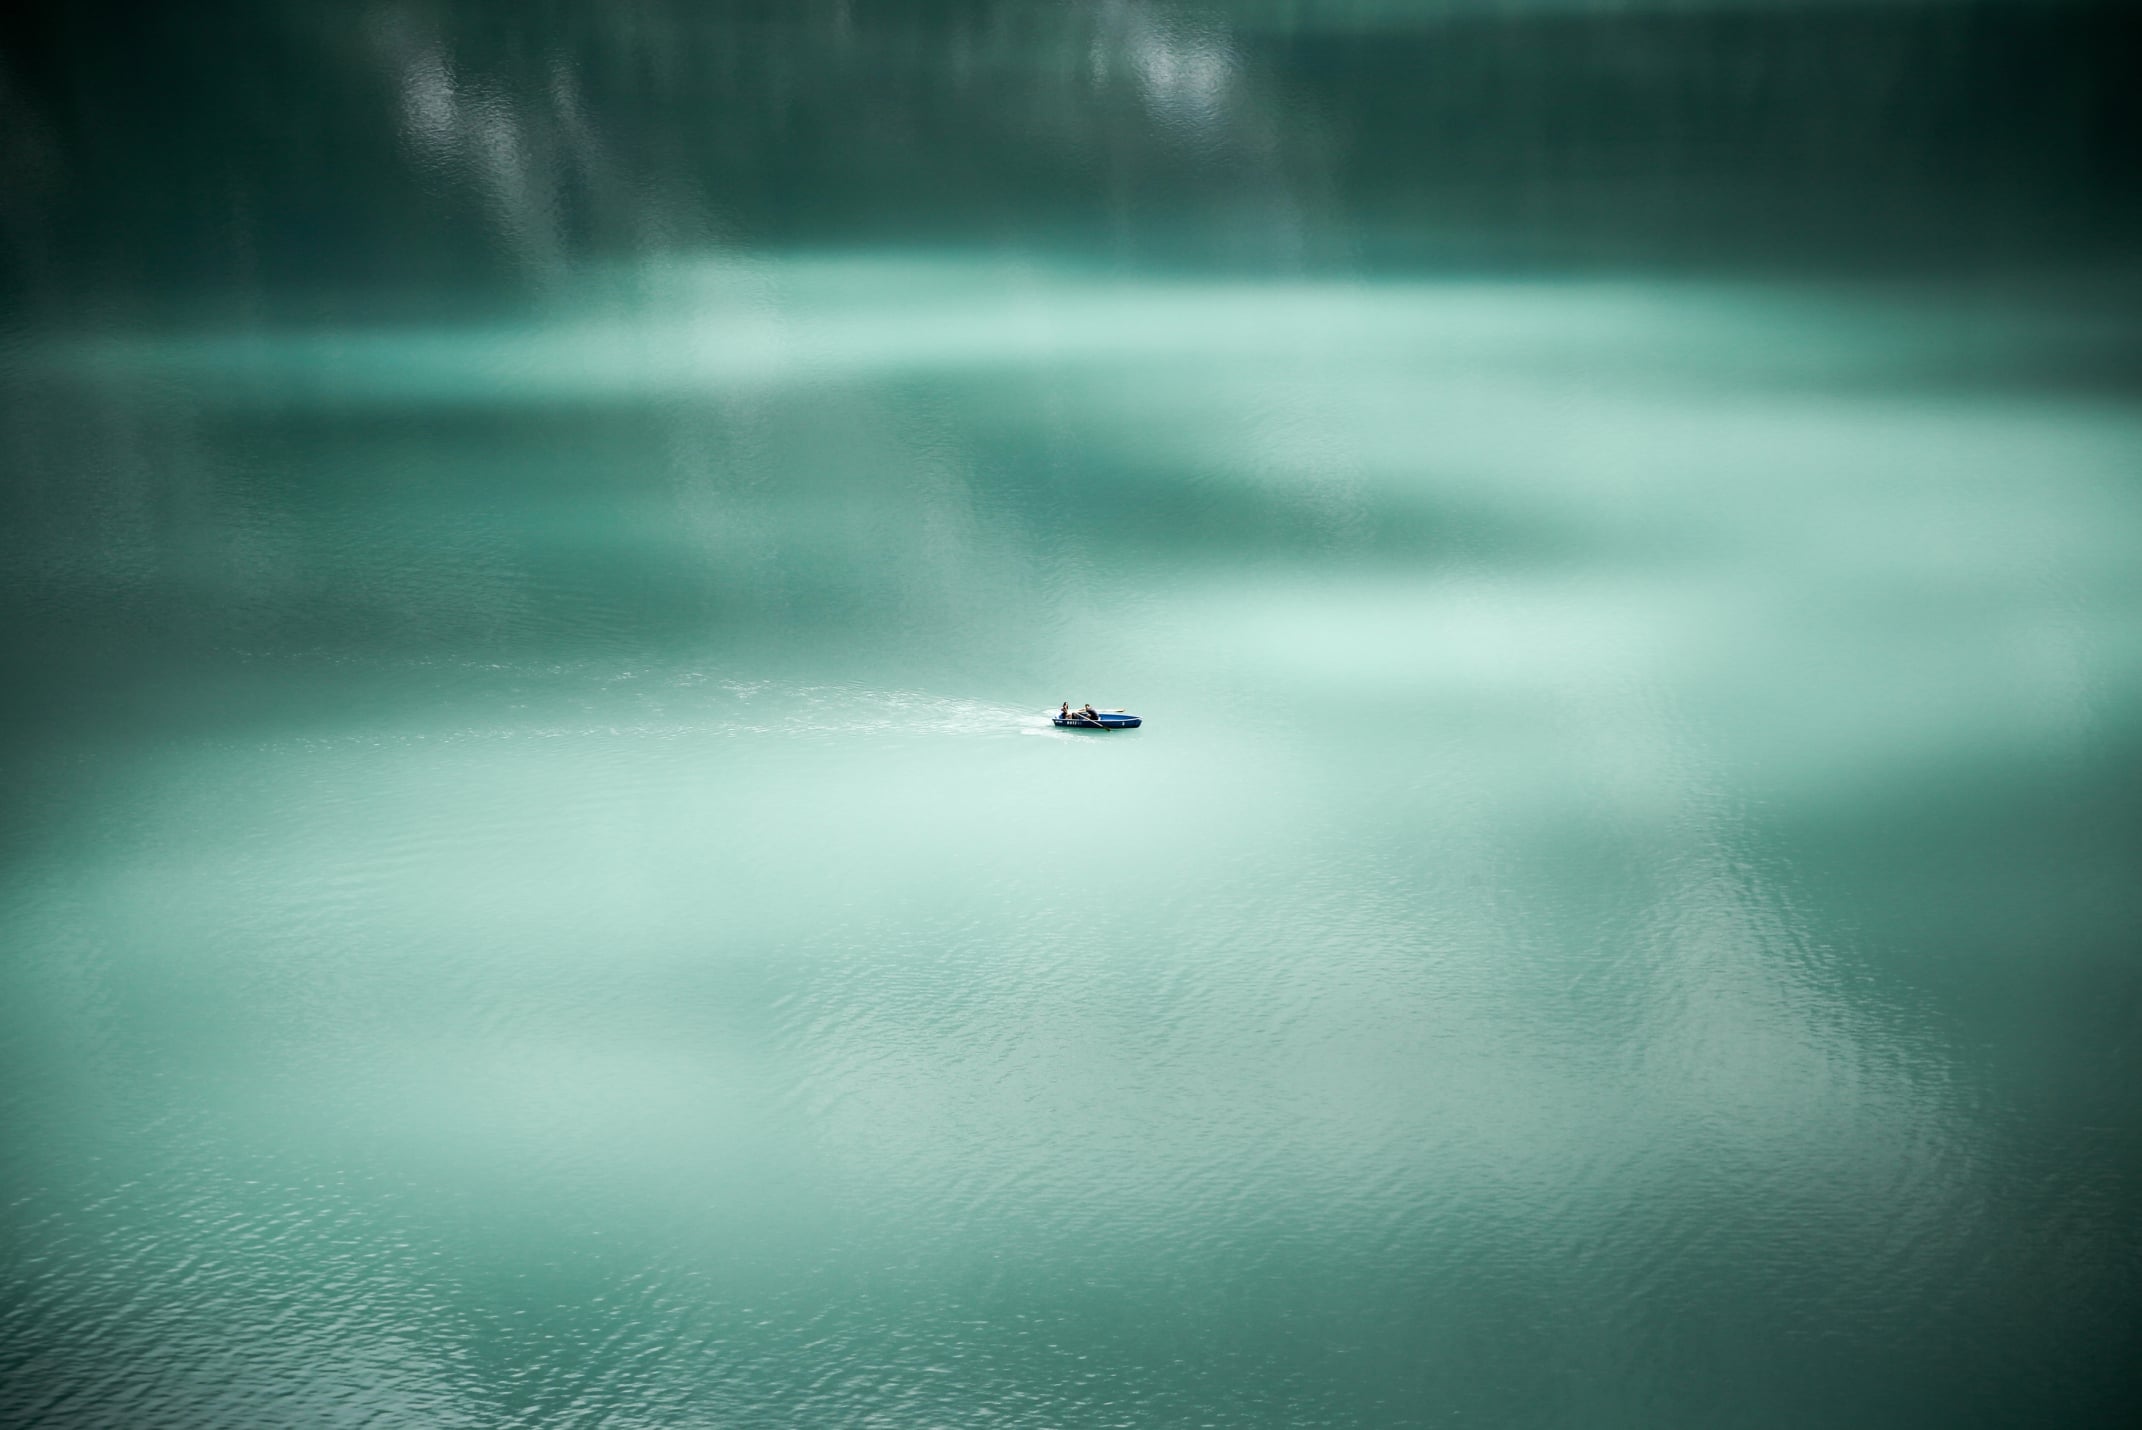 Small boat on a lake.